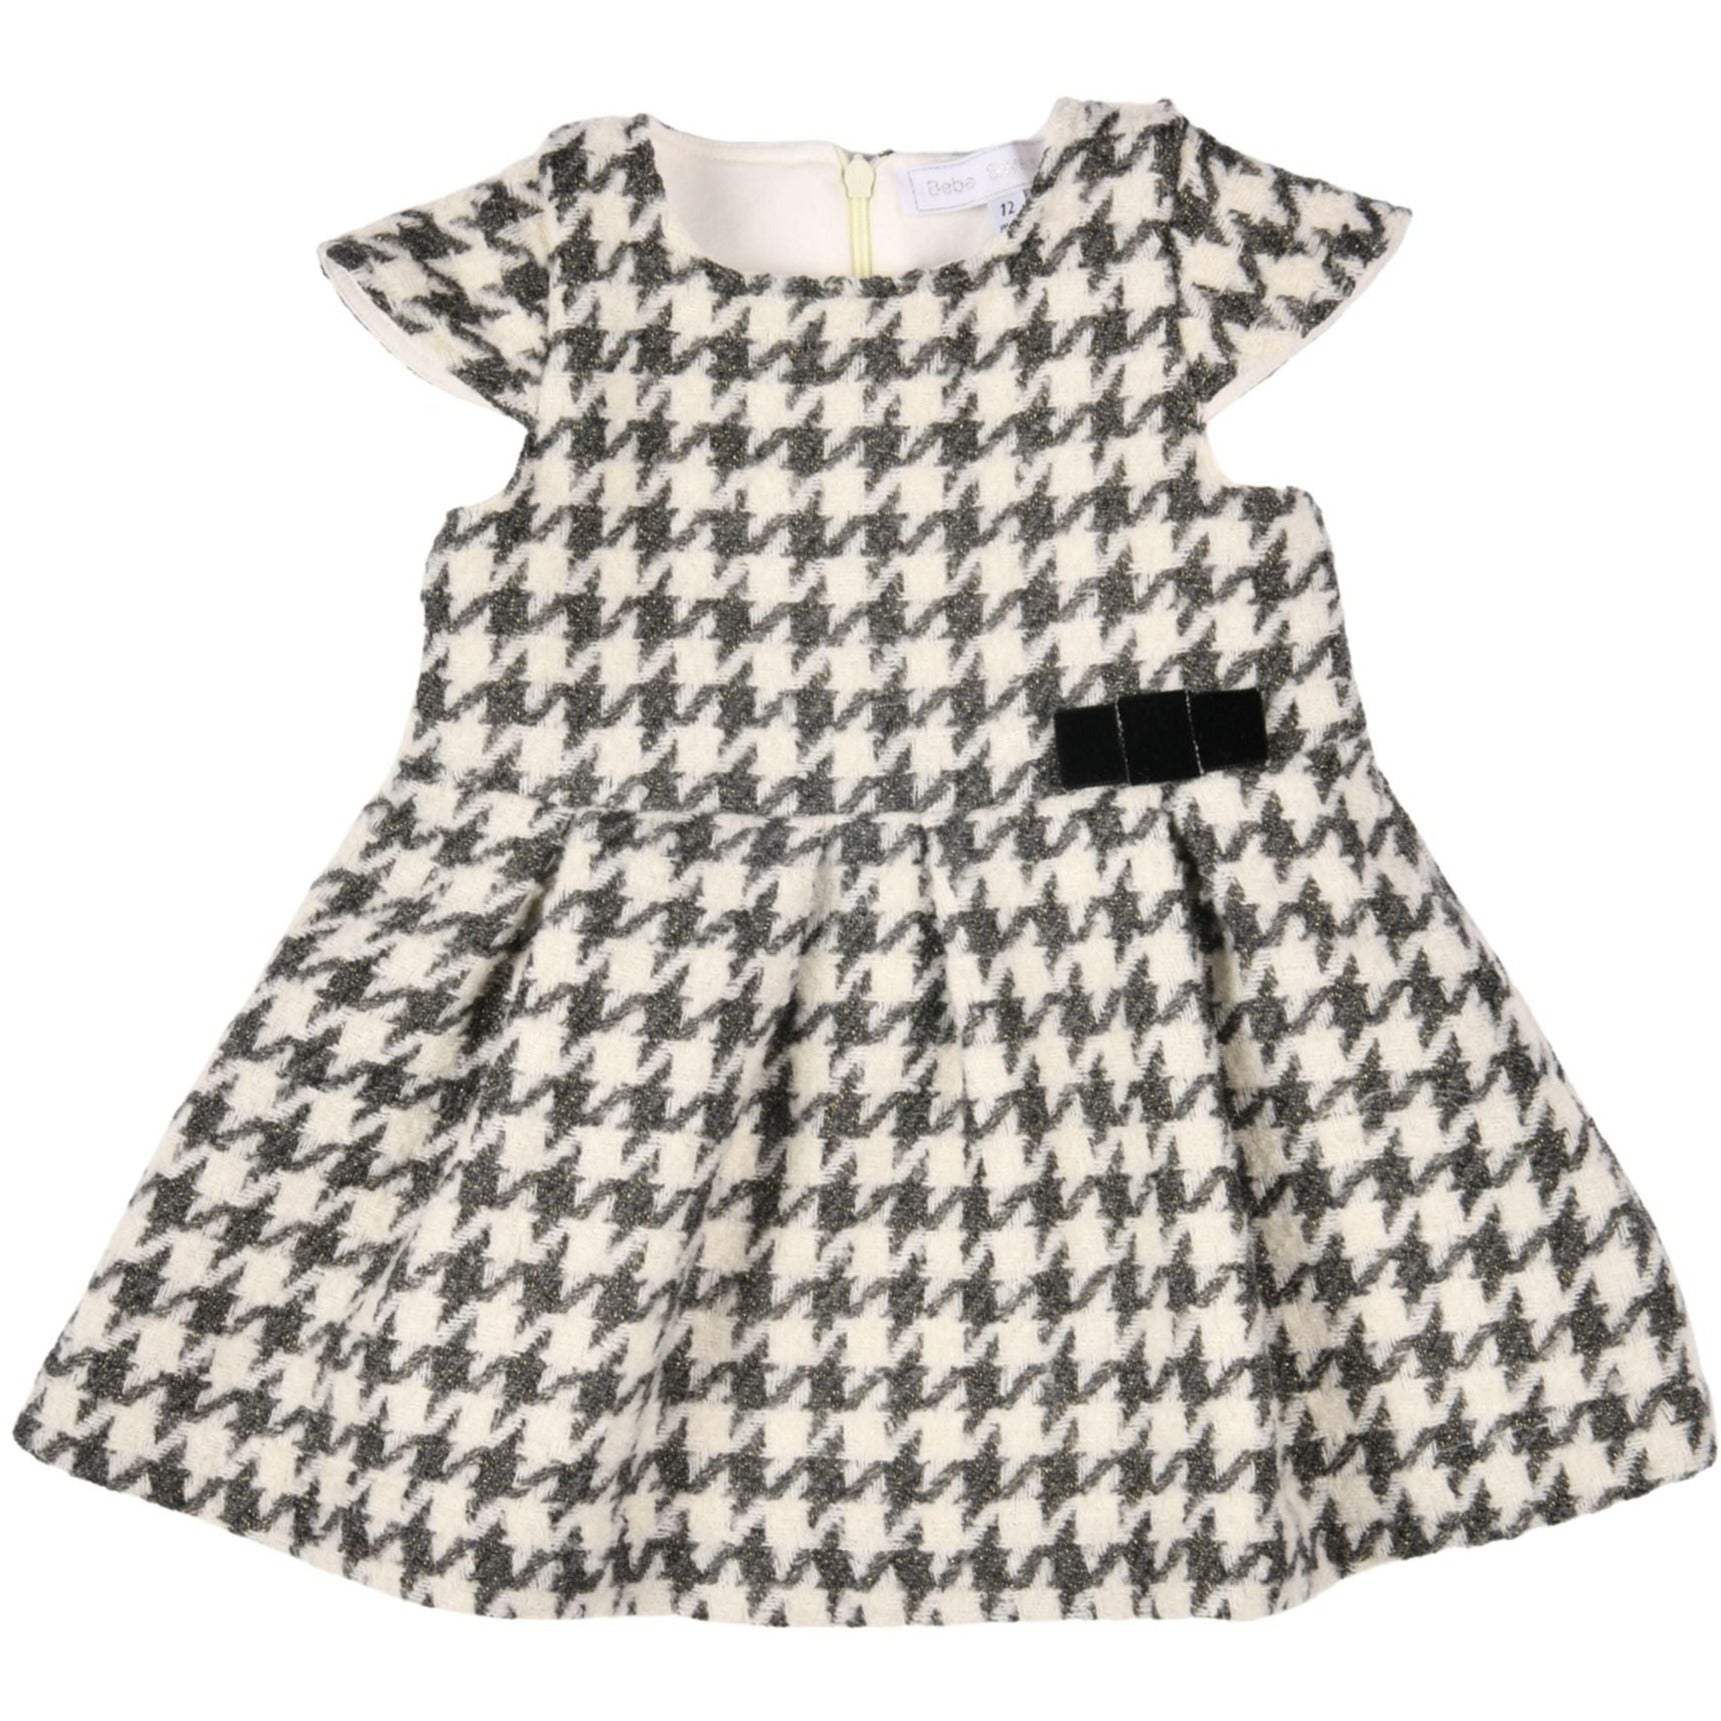 Bébé Sweeny Carla Dress Ivory and Black Tweed With Golden Glitter and Velvet Bow